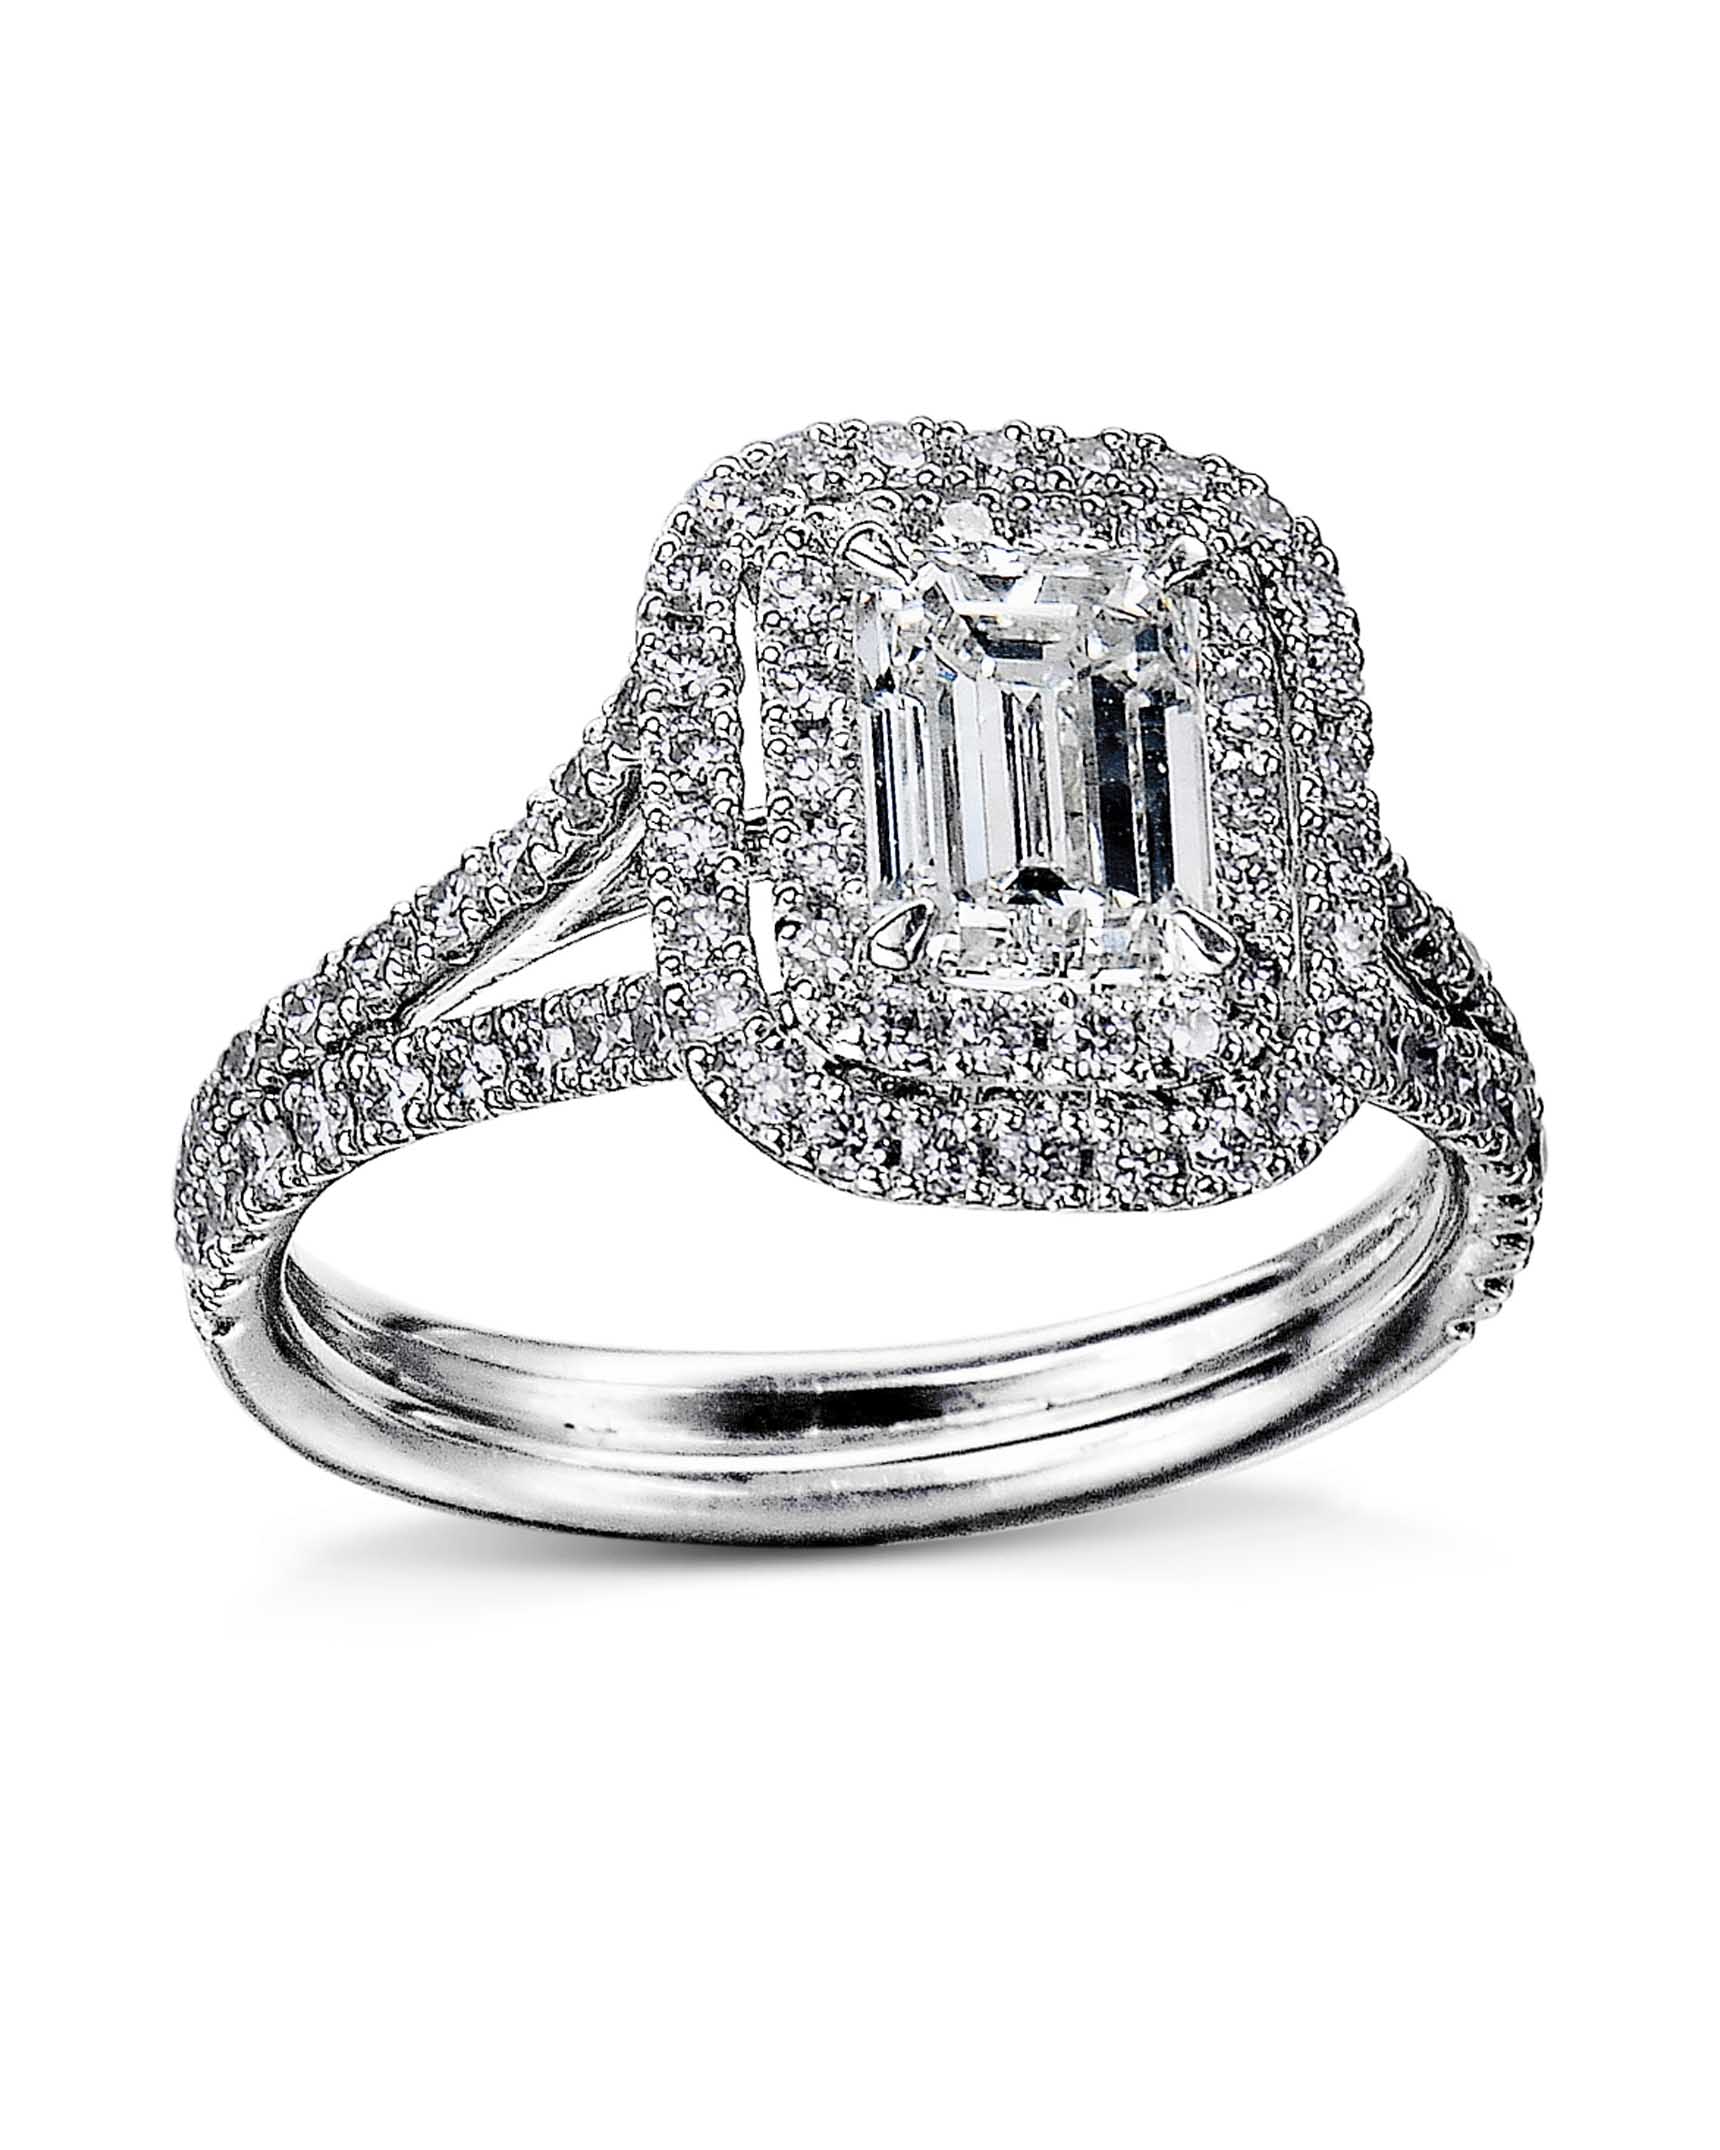 Emerald cut diamonds: Everything You Need to Know - Gem Breakfast